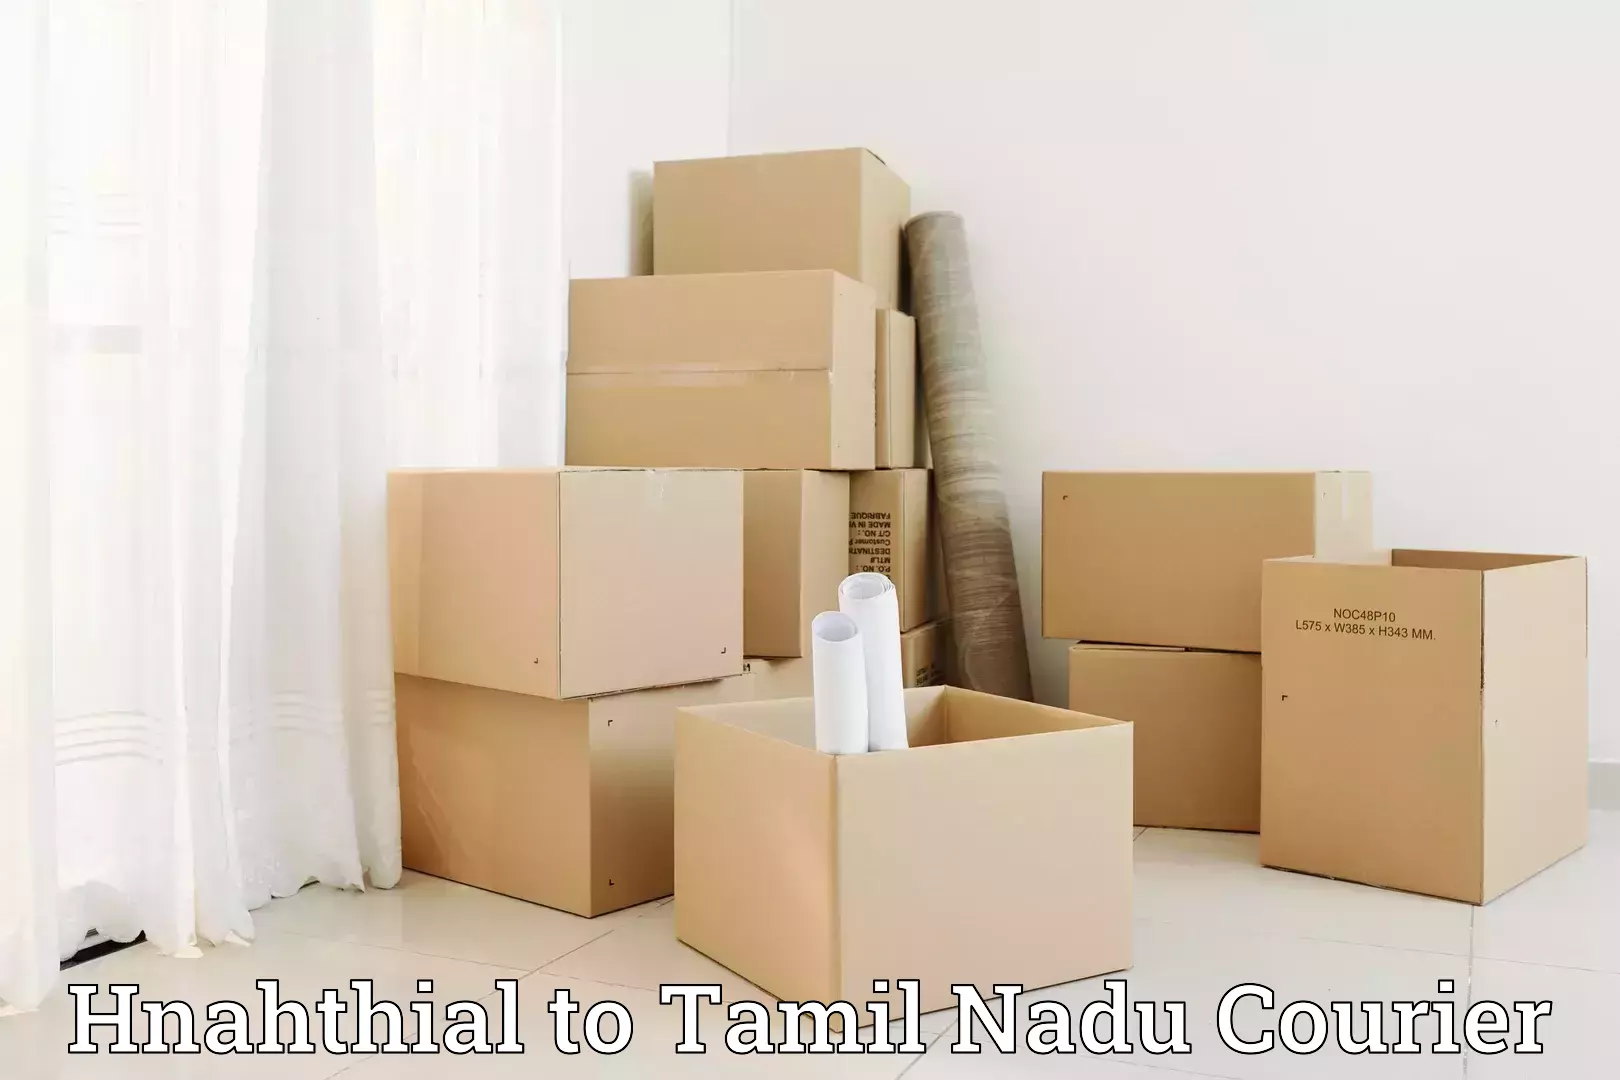 Full-service furniture transport Hnahthial to Ennore Port Chennai